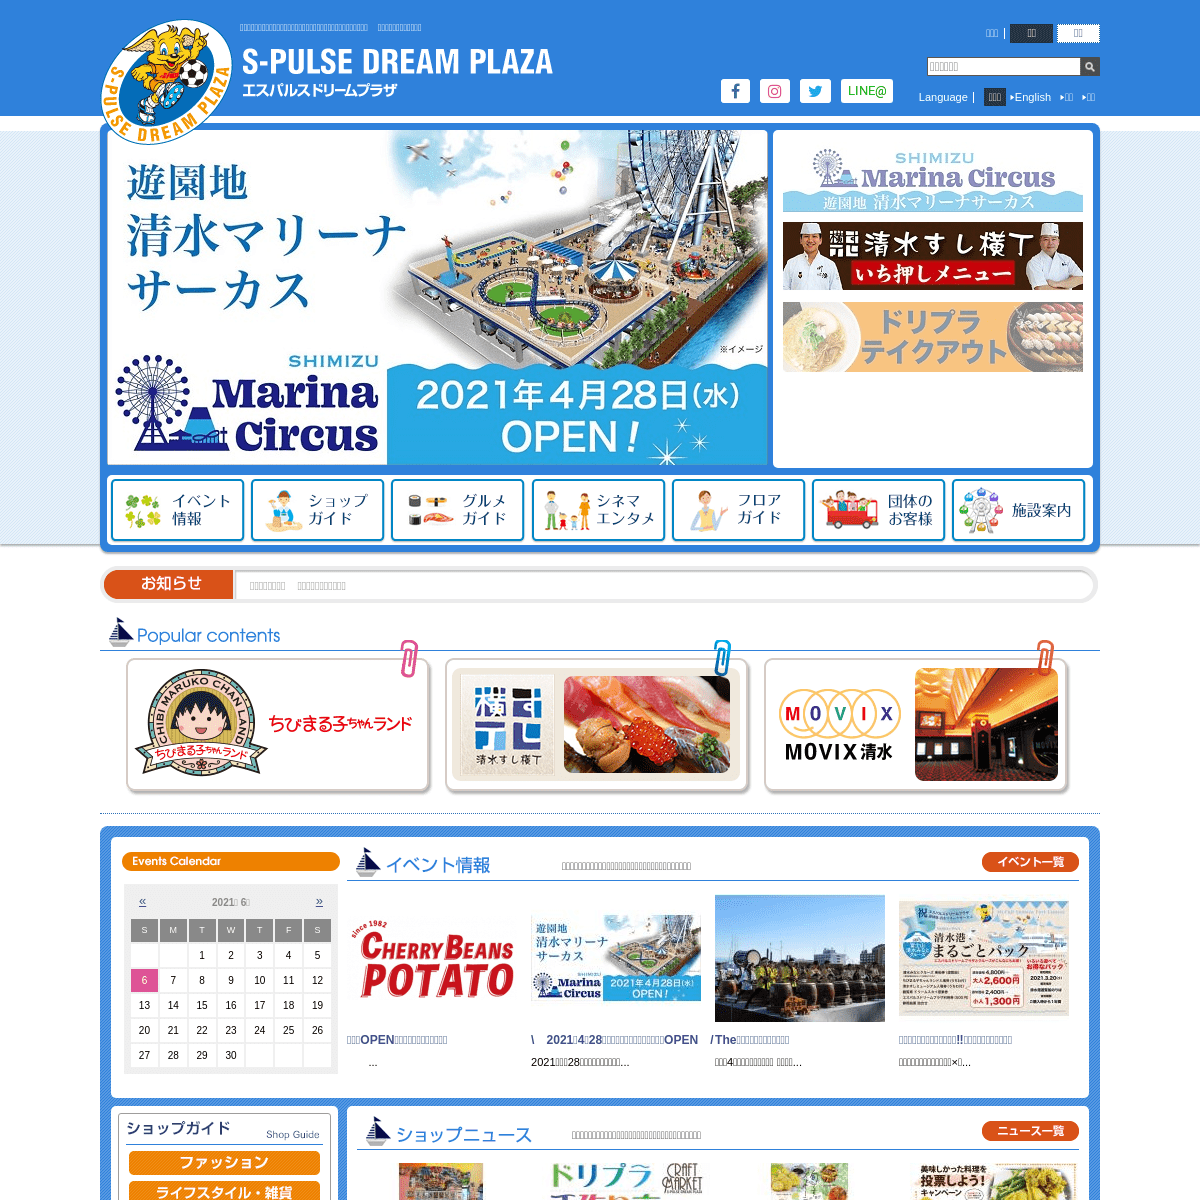 A complete backup of https://dream-plaza.co.jp